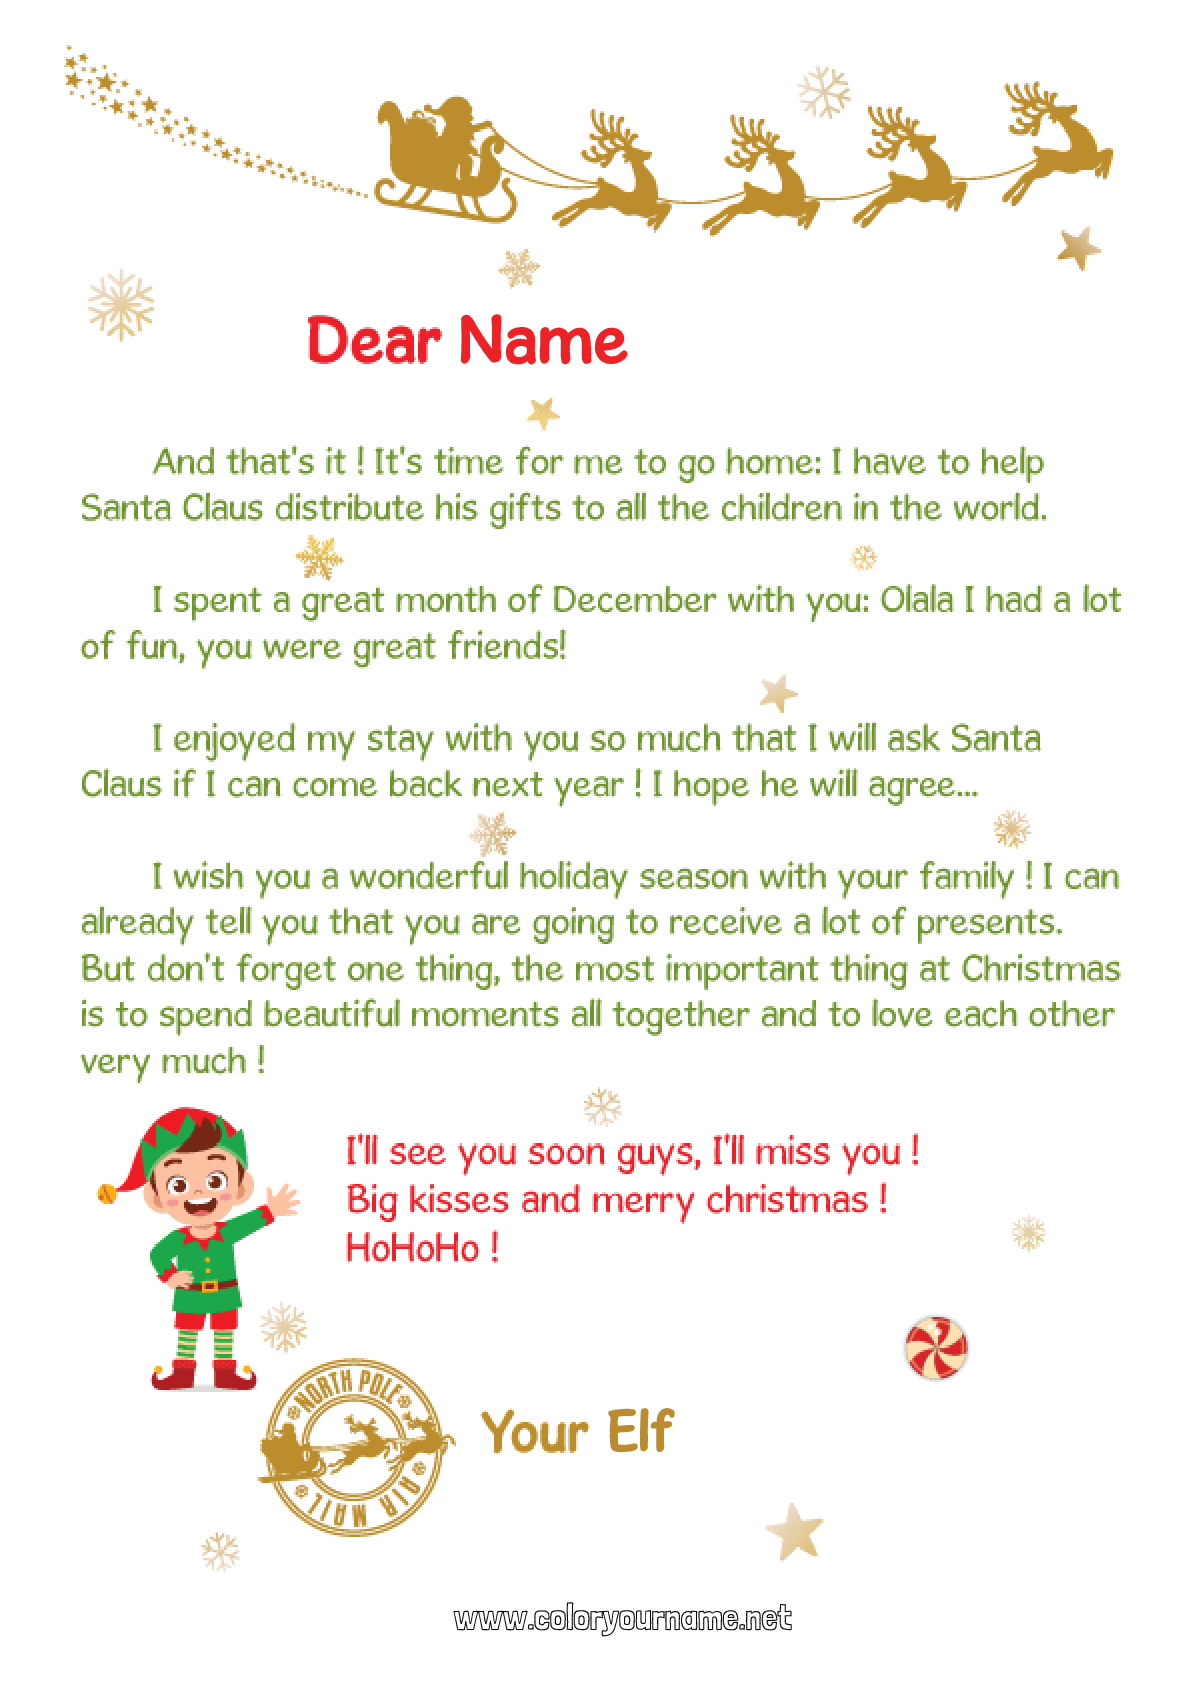 Coloring page No.457 - Christmas elves Letters from prankster elves Elf ...